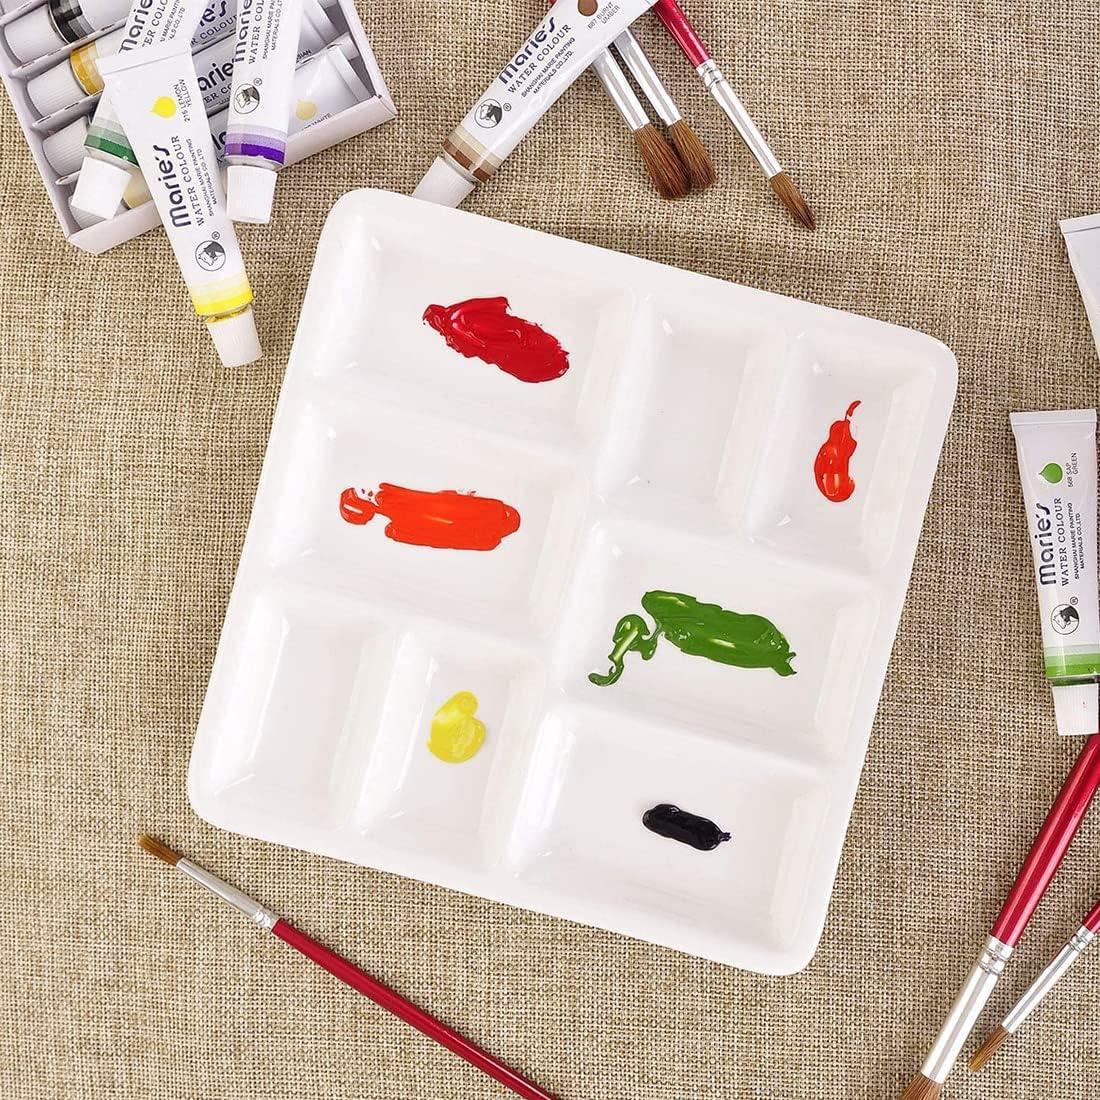 Gemerglity 6 Wells Ceramic Artist Paint Tray Porcelain Watercolor Palette  Ceramic Mixing Tray for Watercolor Gouache Painting 8 Inch